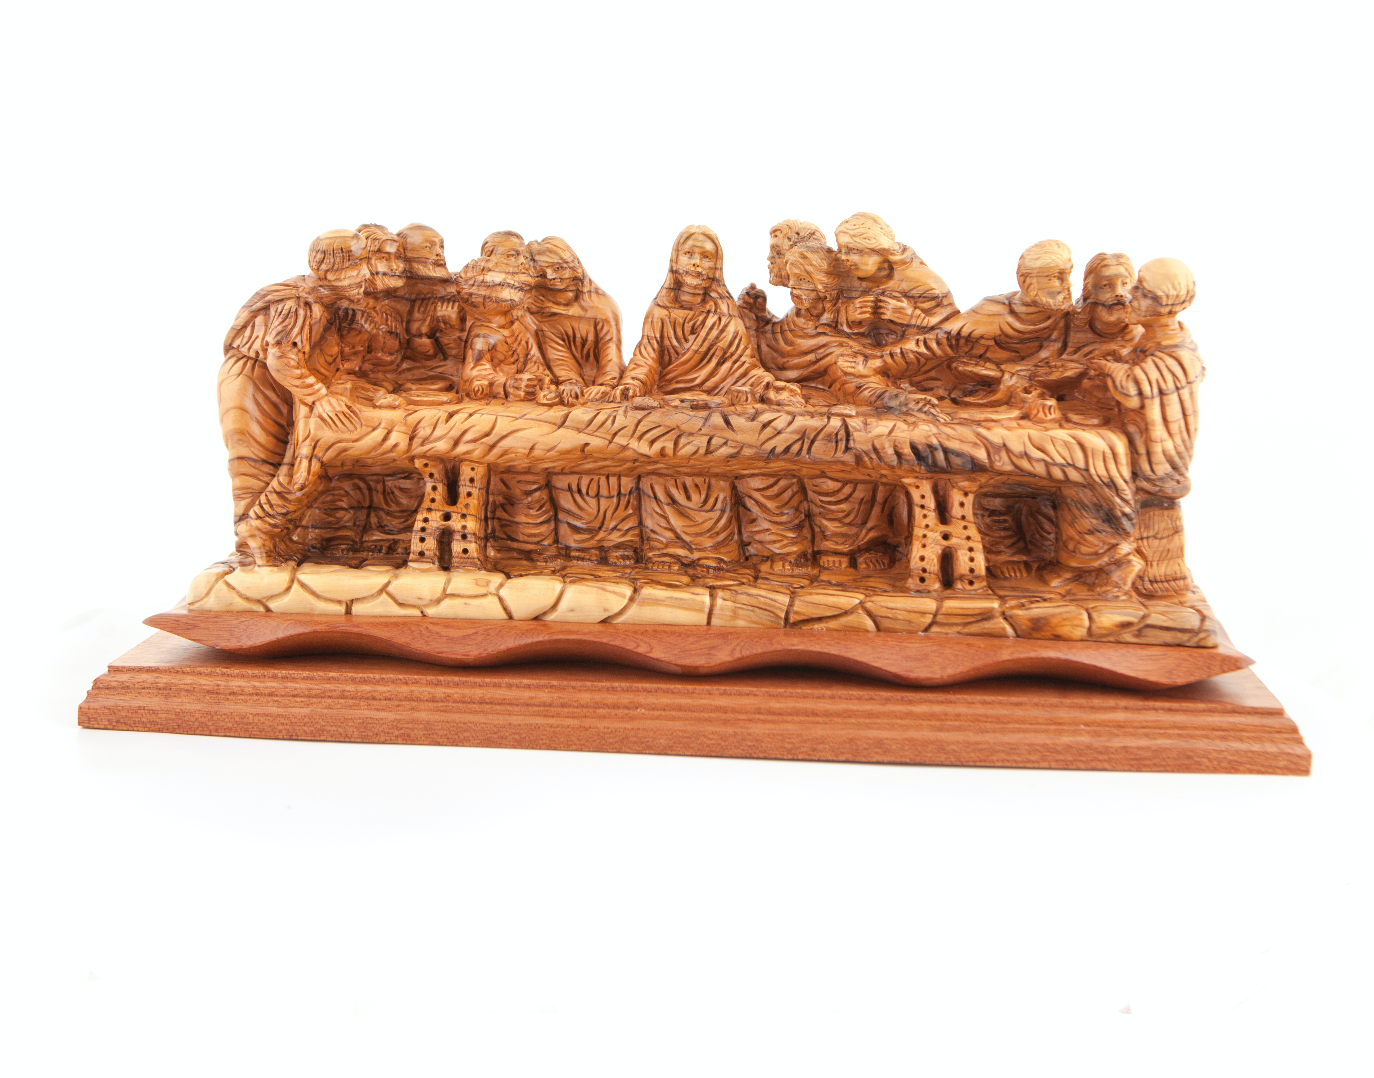 Last Supper Carved Master Piece of Jesus Christ with His Disciples Sharing His Last Passover Meal, Large Dark Brown Mahogany Base, Christian Home Decor Inspired from the Bible